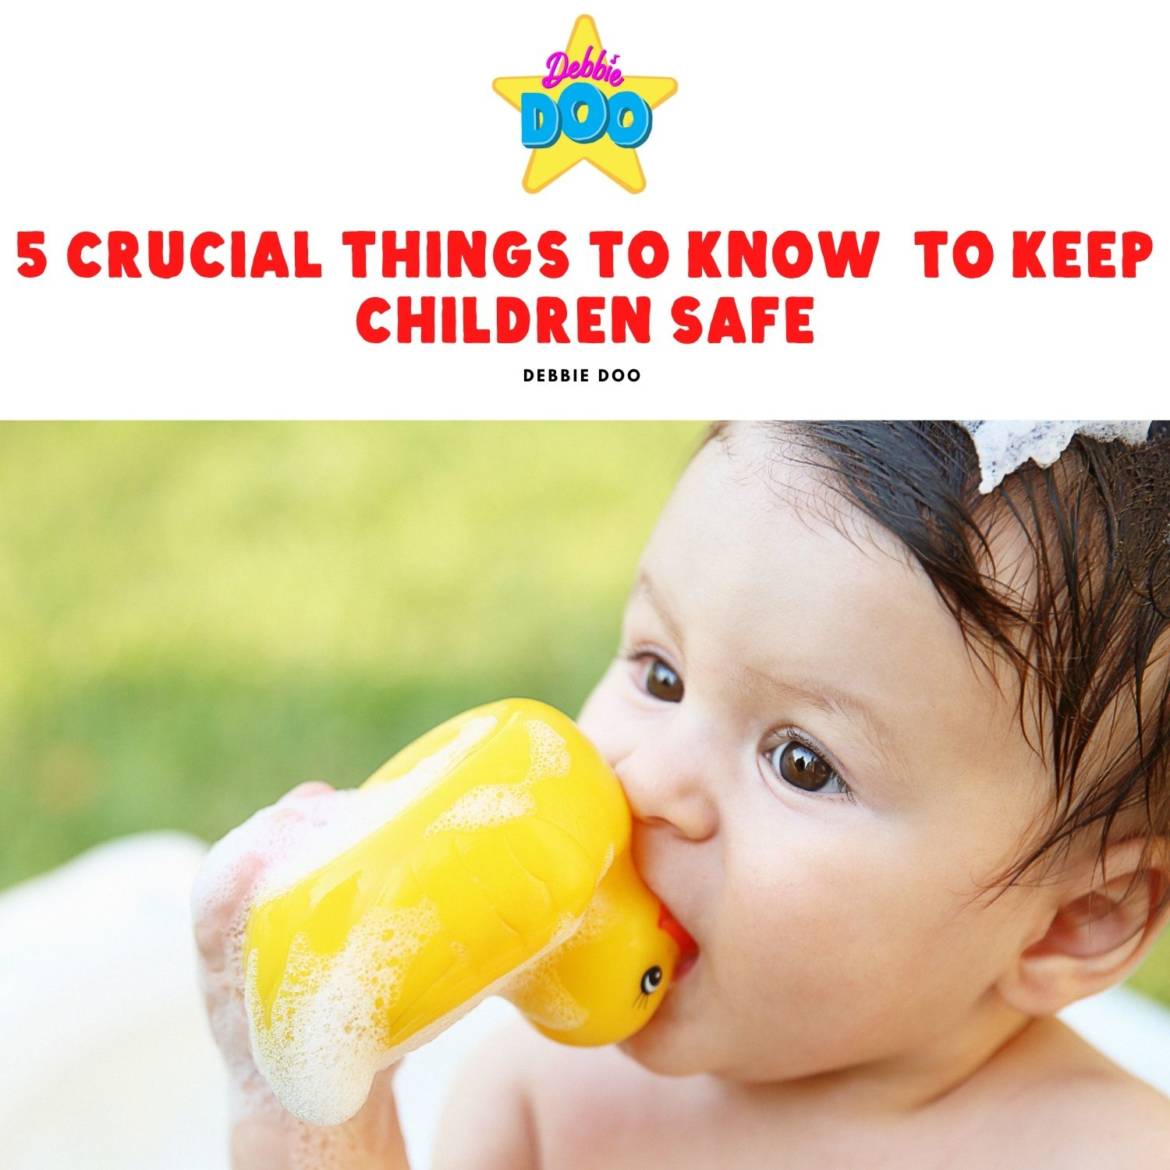 5 Crucial Things to Know To Keep Children Safe